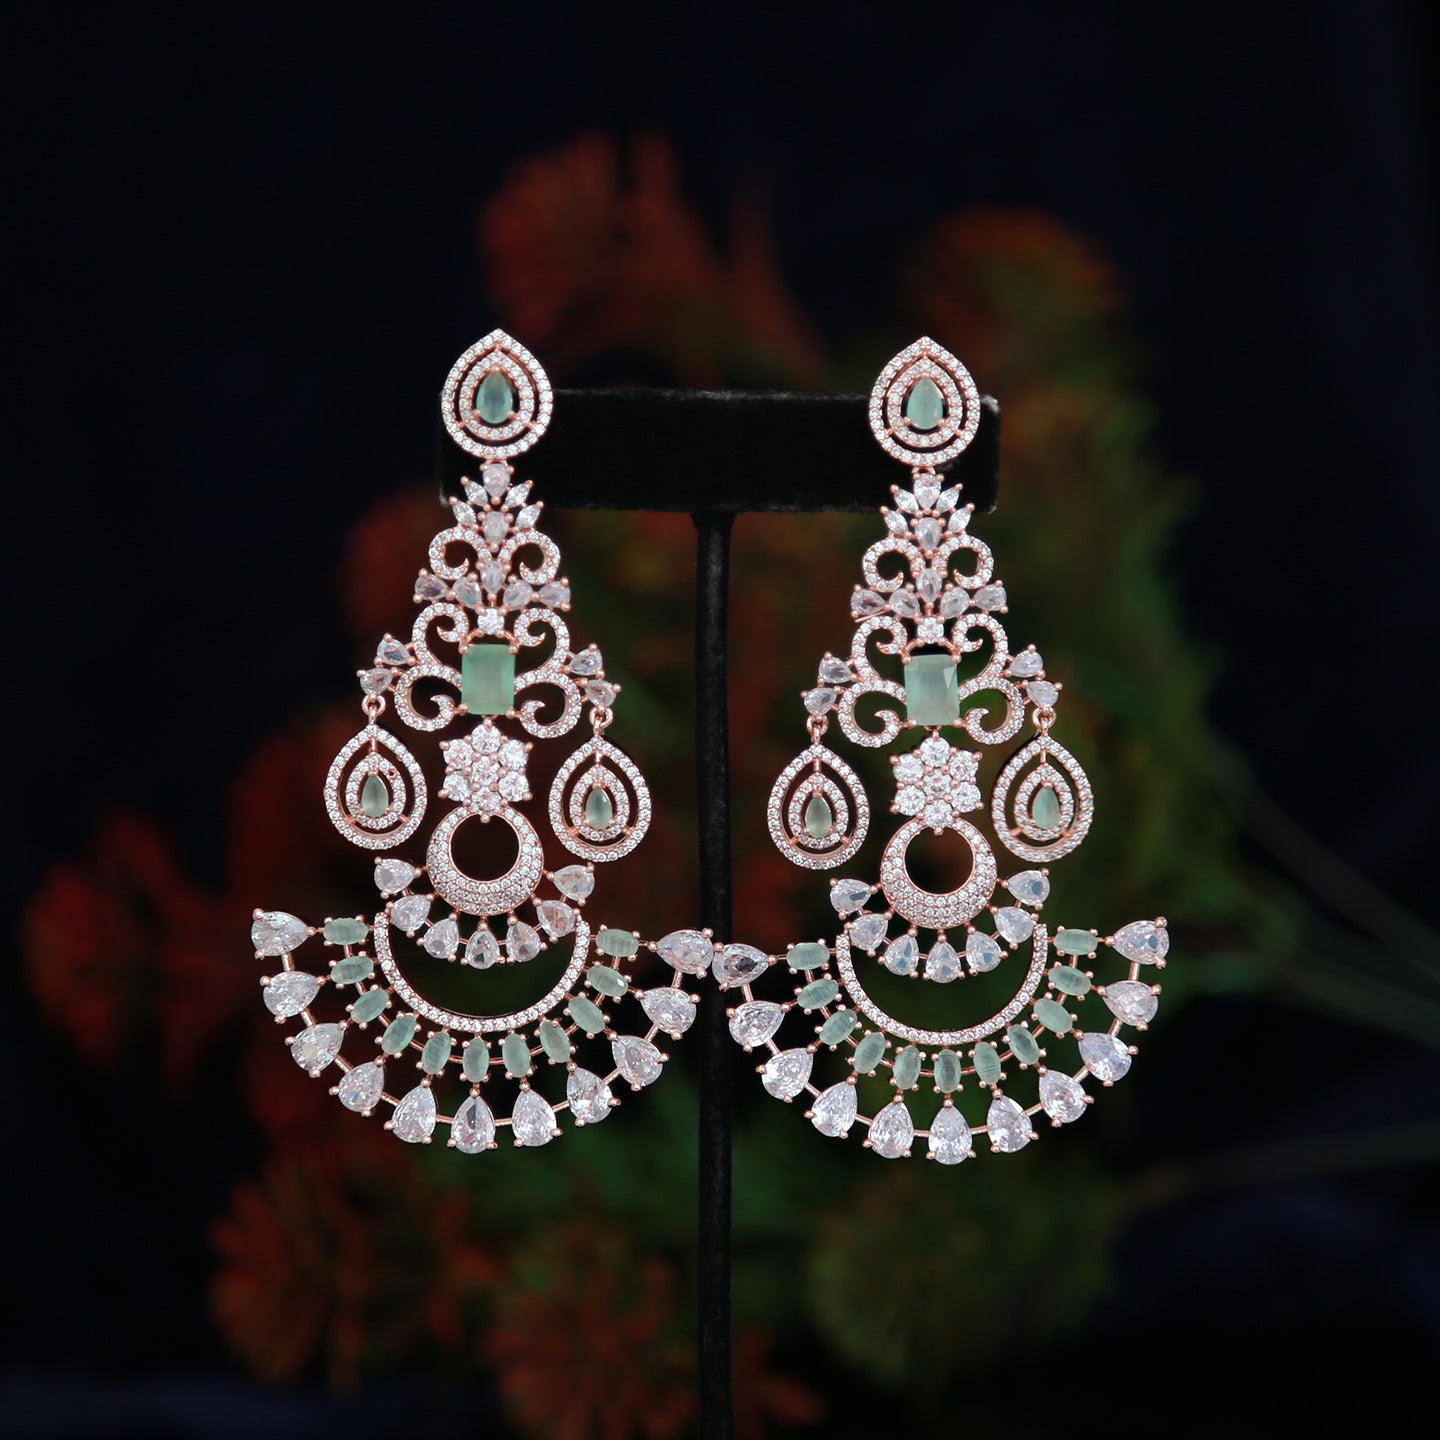 Rose Gold American Diamond Chandbali Earrings | Traditional Ethnic Party wear Earrings |High Quality Indian Jewelry Earrings | Gift for Her